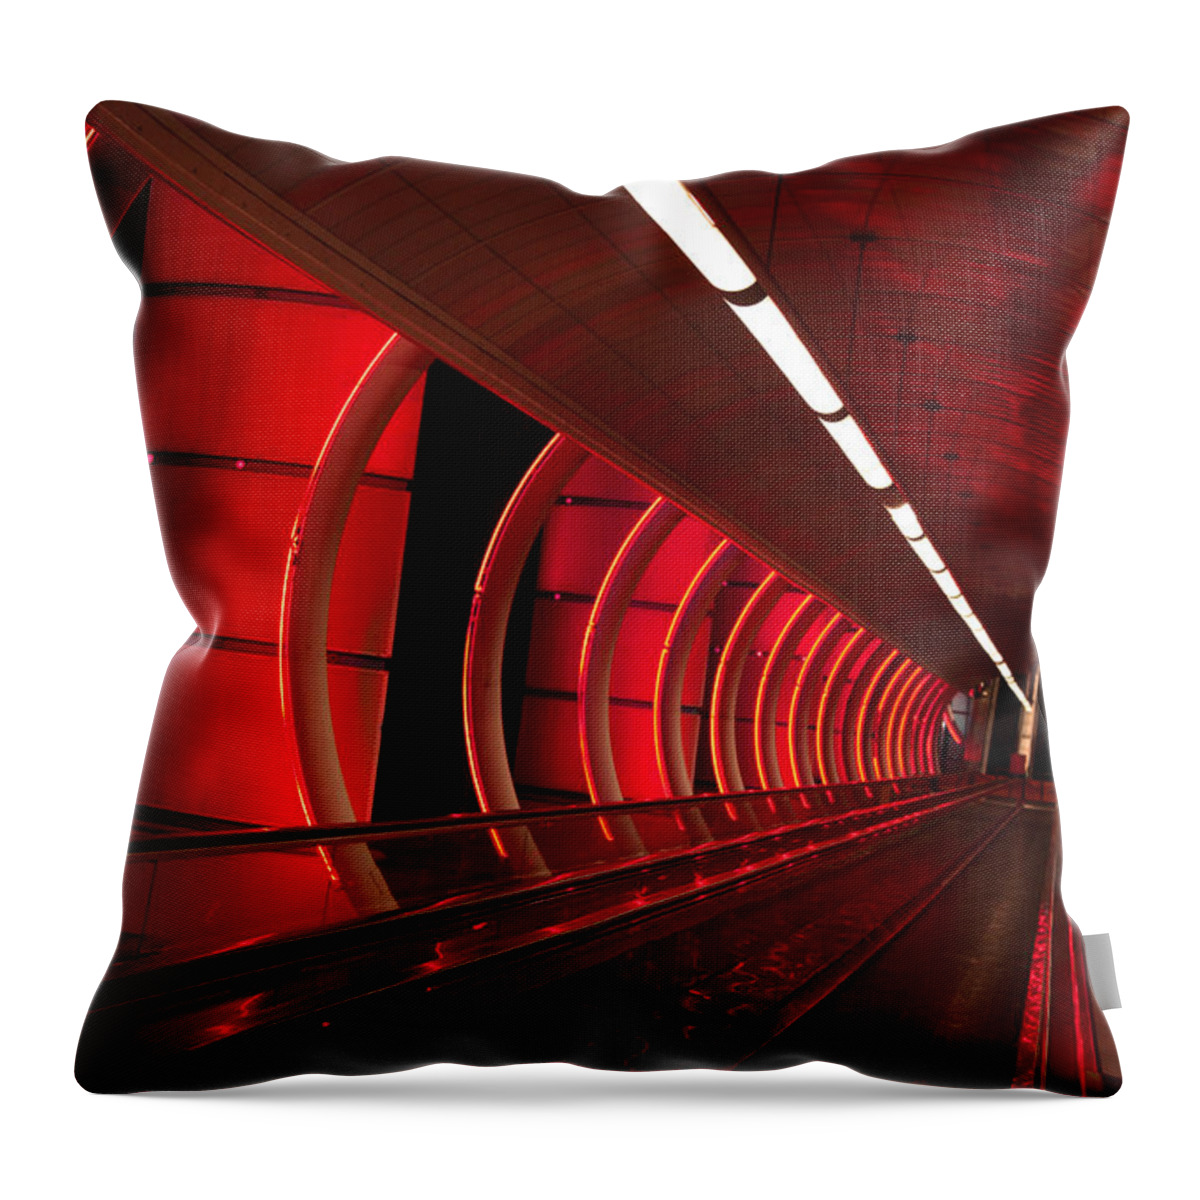 Moving Sidewalk Throw Pillow featuring the photograph Moving Sidewalk Abstract Red by Donna Corless